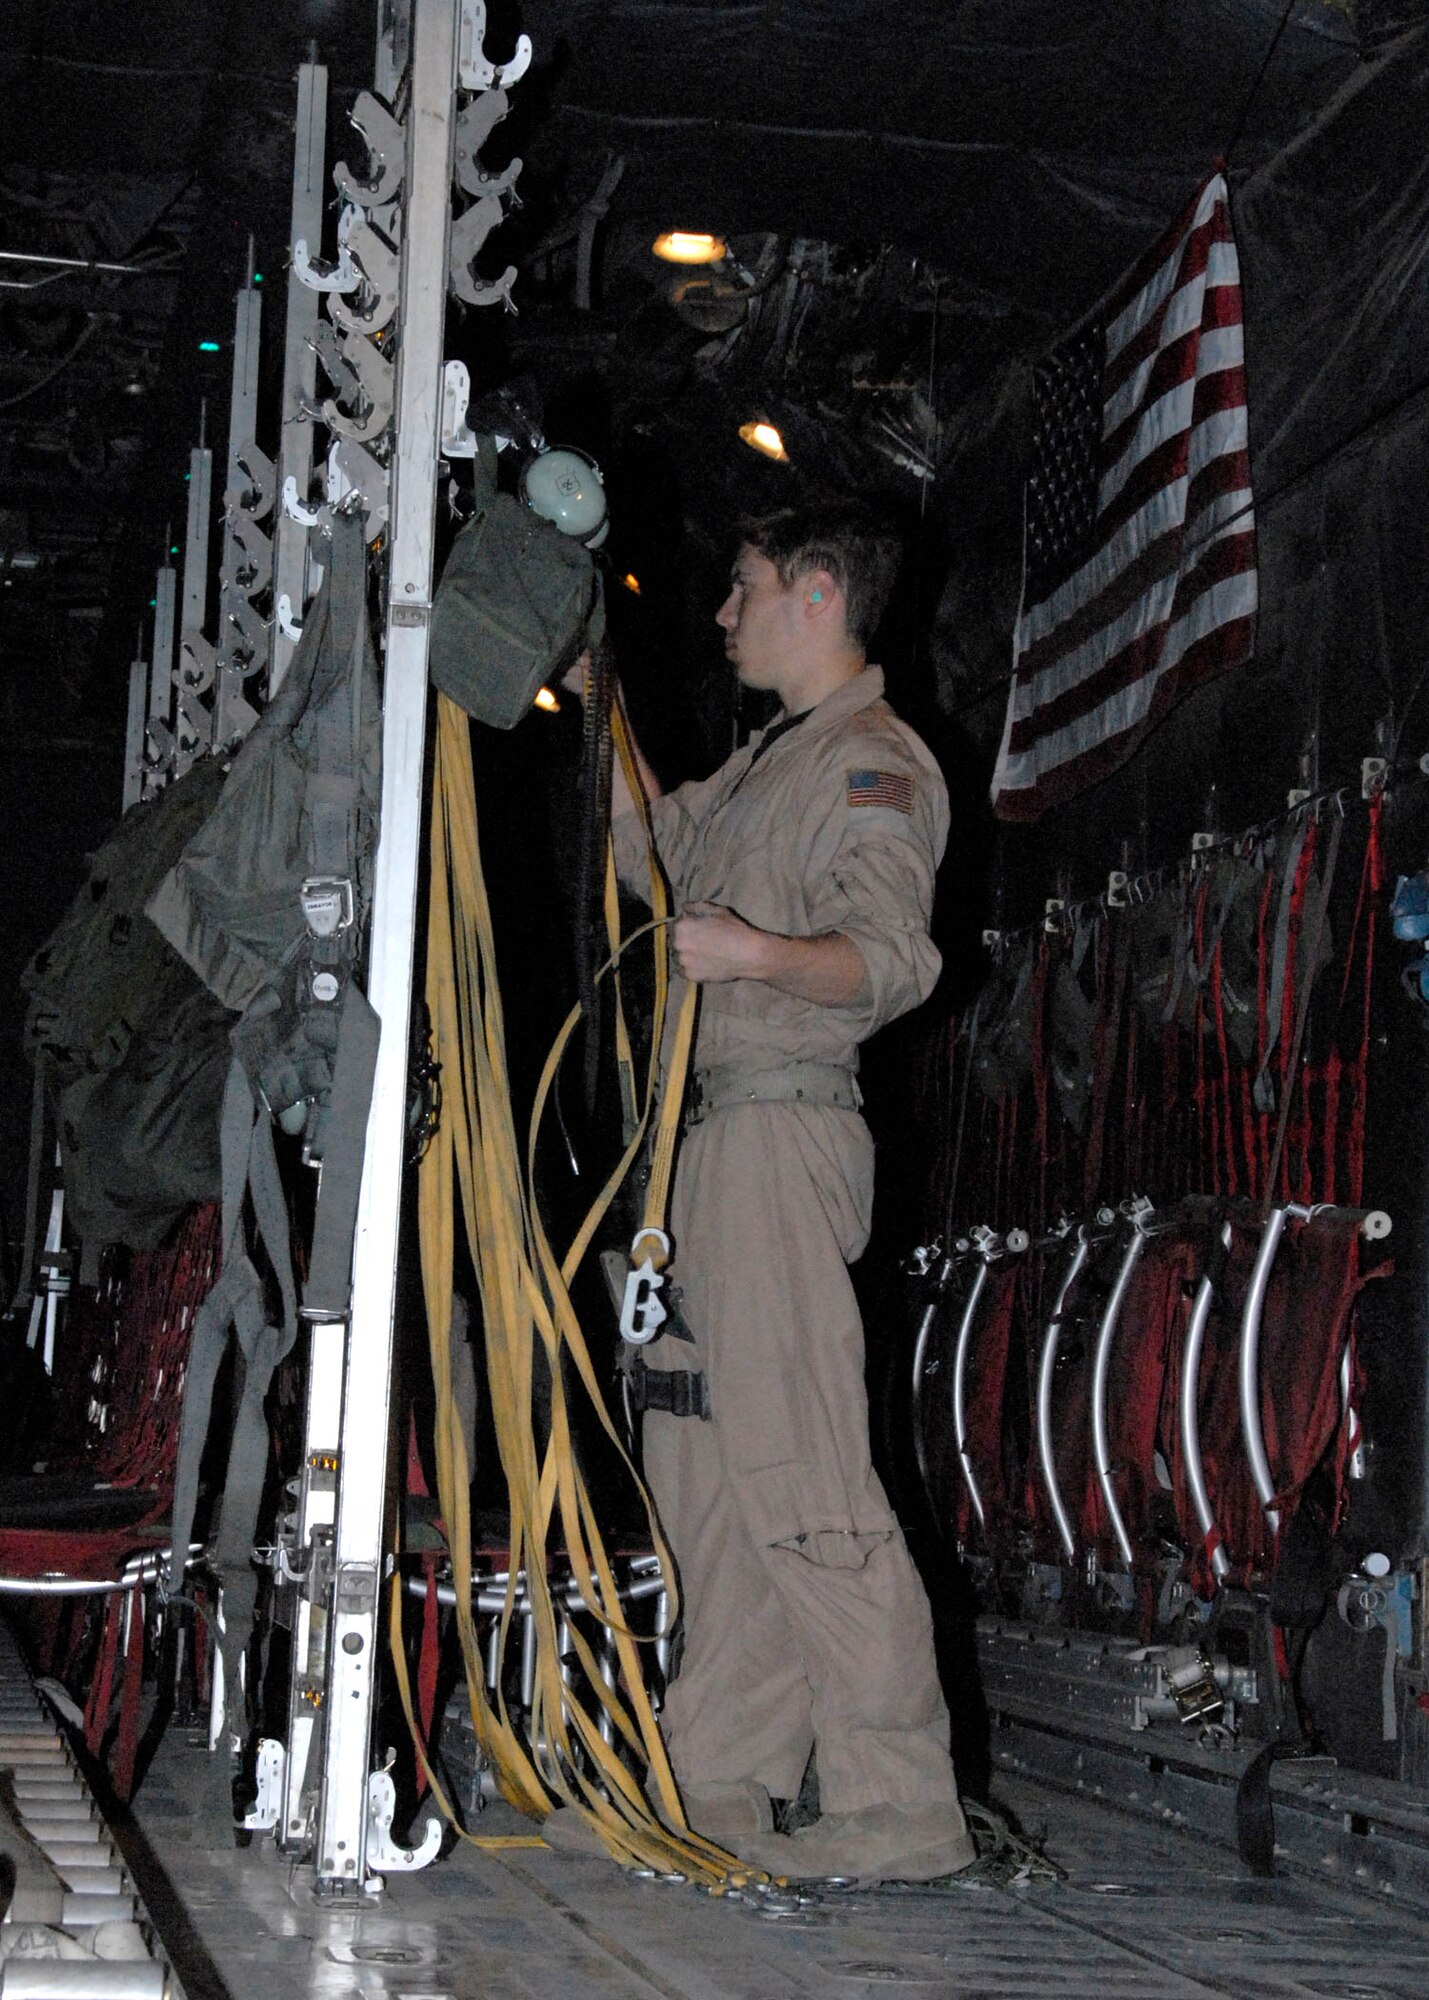 SOUTHWEST ASIA -- Staff Sgt. Gabriel Molanders, an Air Force C-130 Hercules loadmaster puts away the static lines used in airdropping several hundred thousand leaflets over an Iraqi city in May 2008. Sergeant Molanders, with the 737th Expeditionary Airlift Squadron, is deployed from Dyess Air Force Base, Texas. (U.S. Air Force photo/Tech. Sgt. Michael O'Connor)